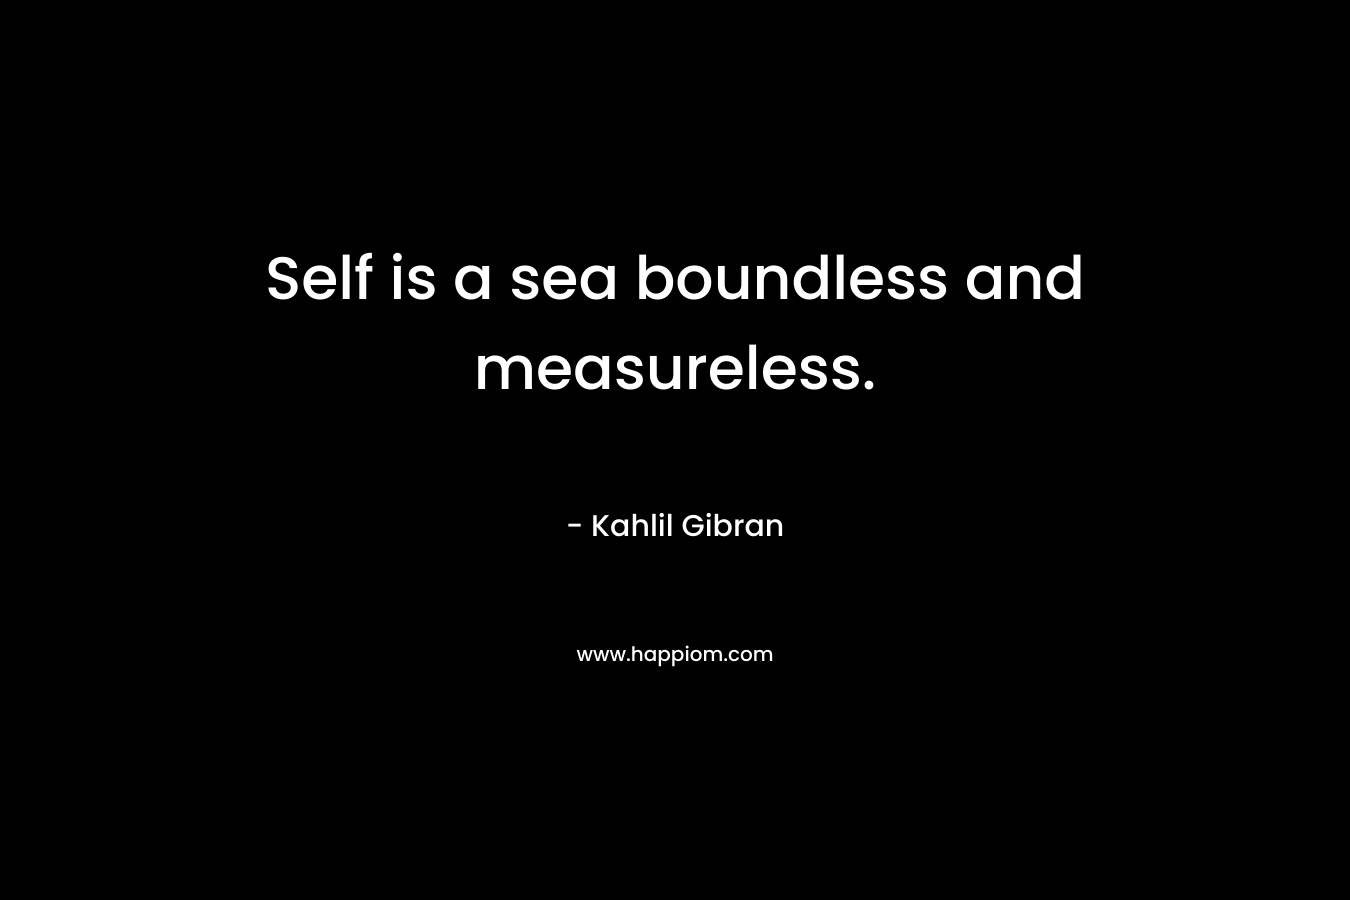 Self is a sea boundless and measureless.